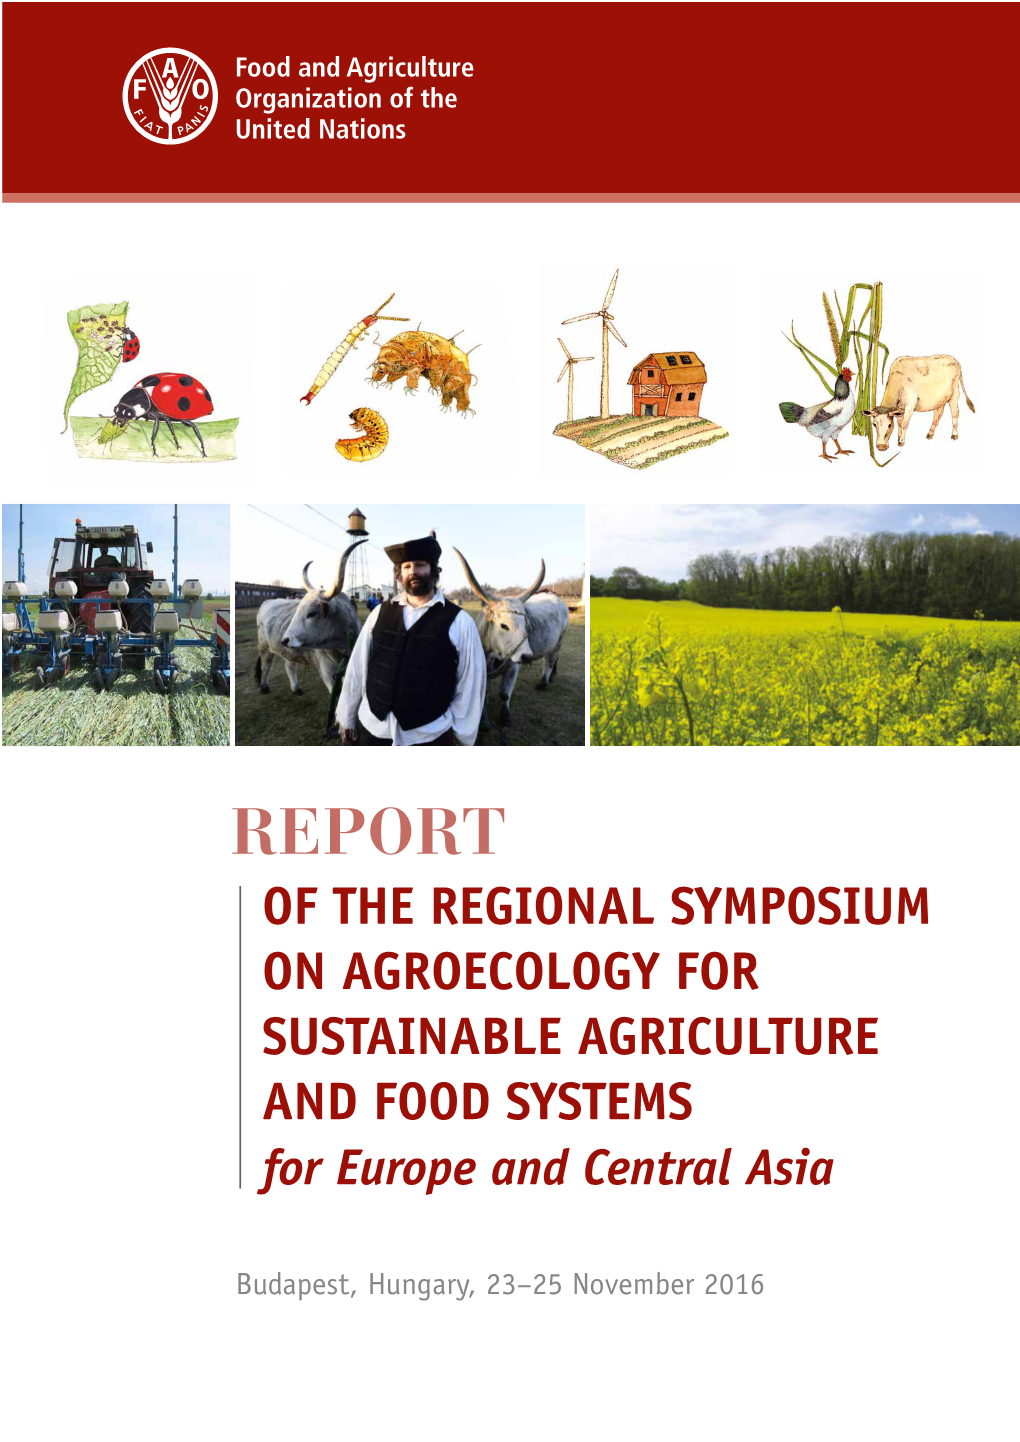 REPORT of the REGIONAL SYMPOSIUM on AGROECOLOGY for SUSTAINABLE AGRICULTURE and FOOD SYSTEMS for Europe and Central Asia